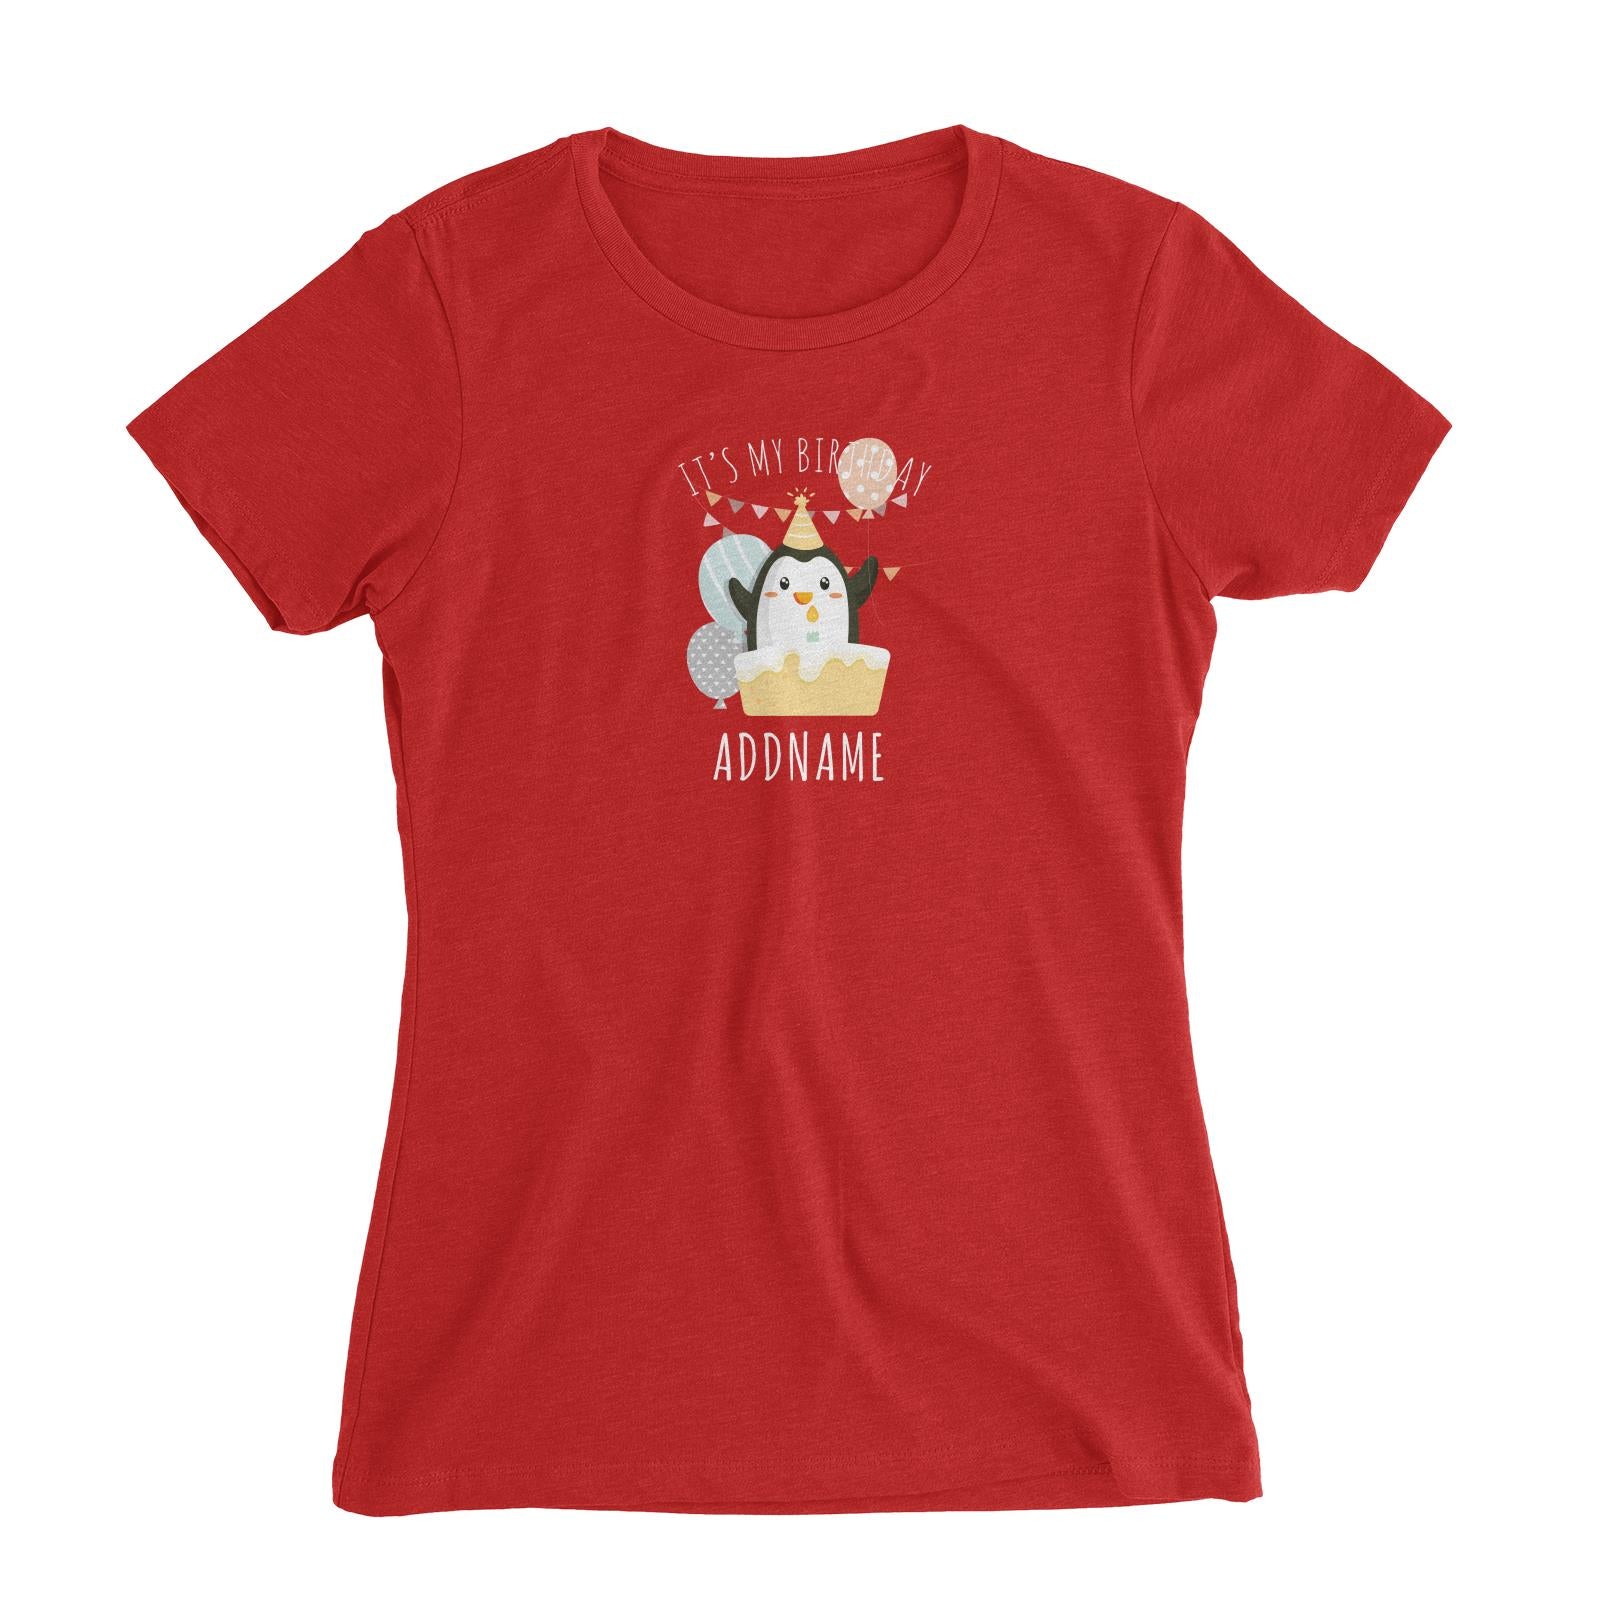 Birthday Cute Penguin And Cake It's My Birthday Addname Women's Slim Fit T-Shirt